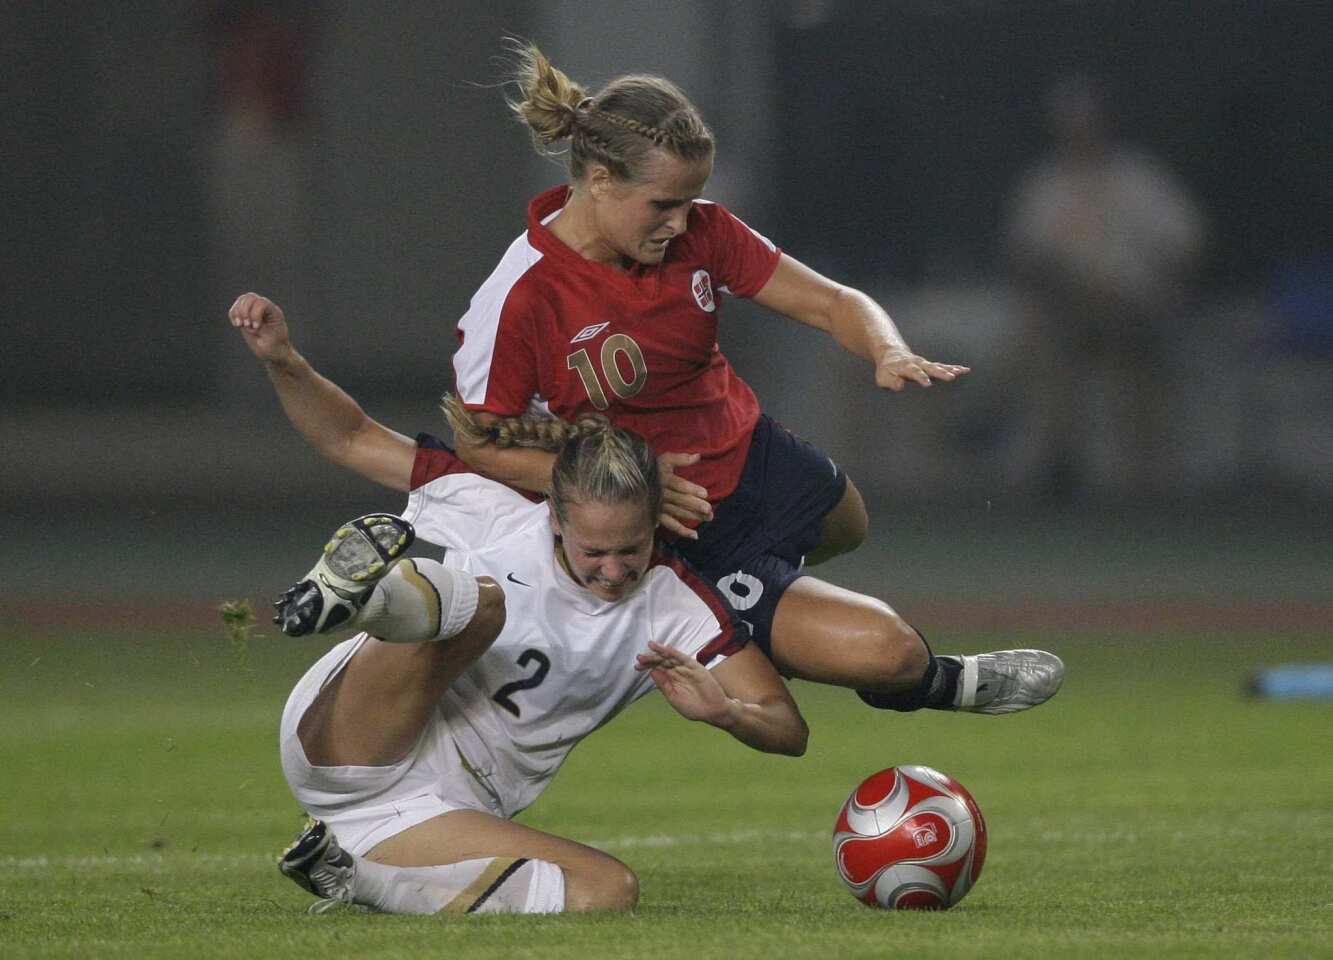 The United States' Heather Mitts, bottom, fights for the ball with Norway's Melissa Wiik during their match at the 2008 Beijing Olympics.